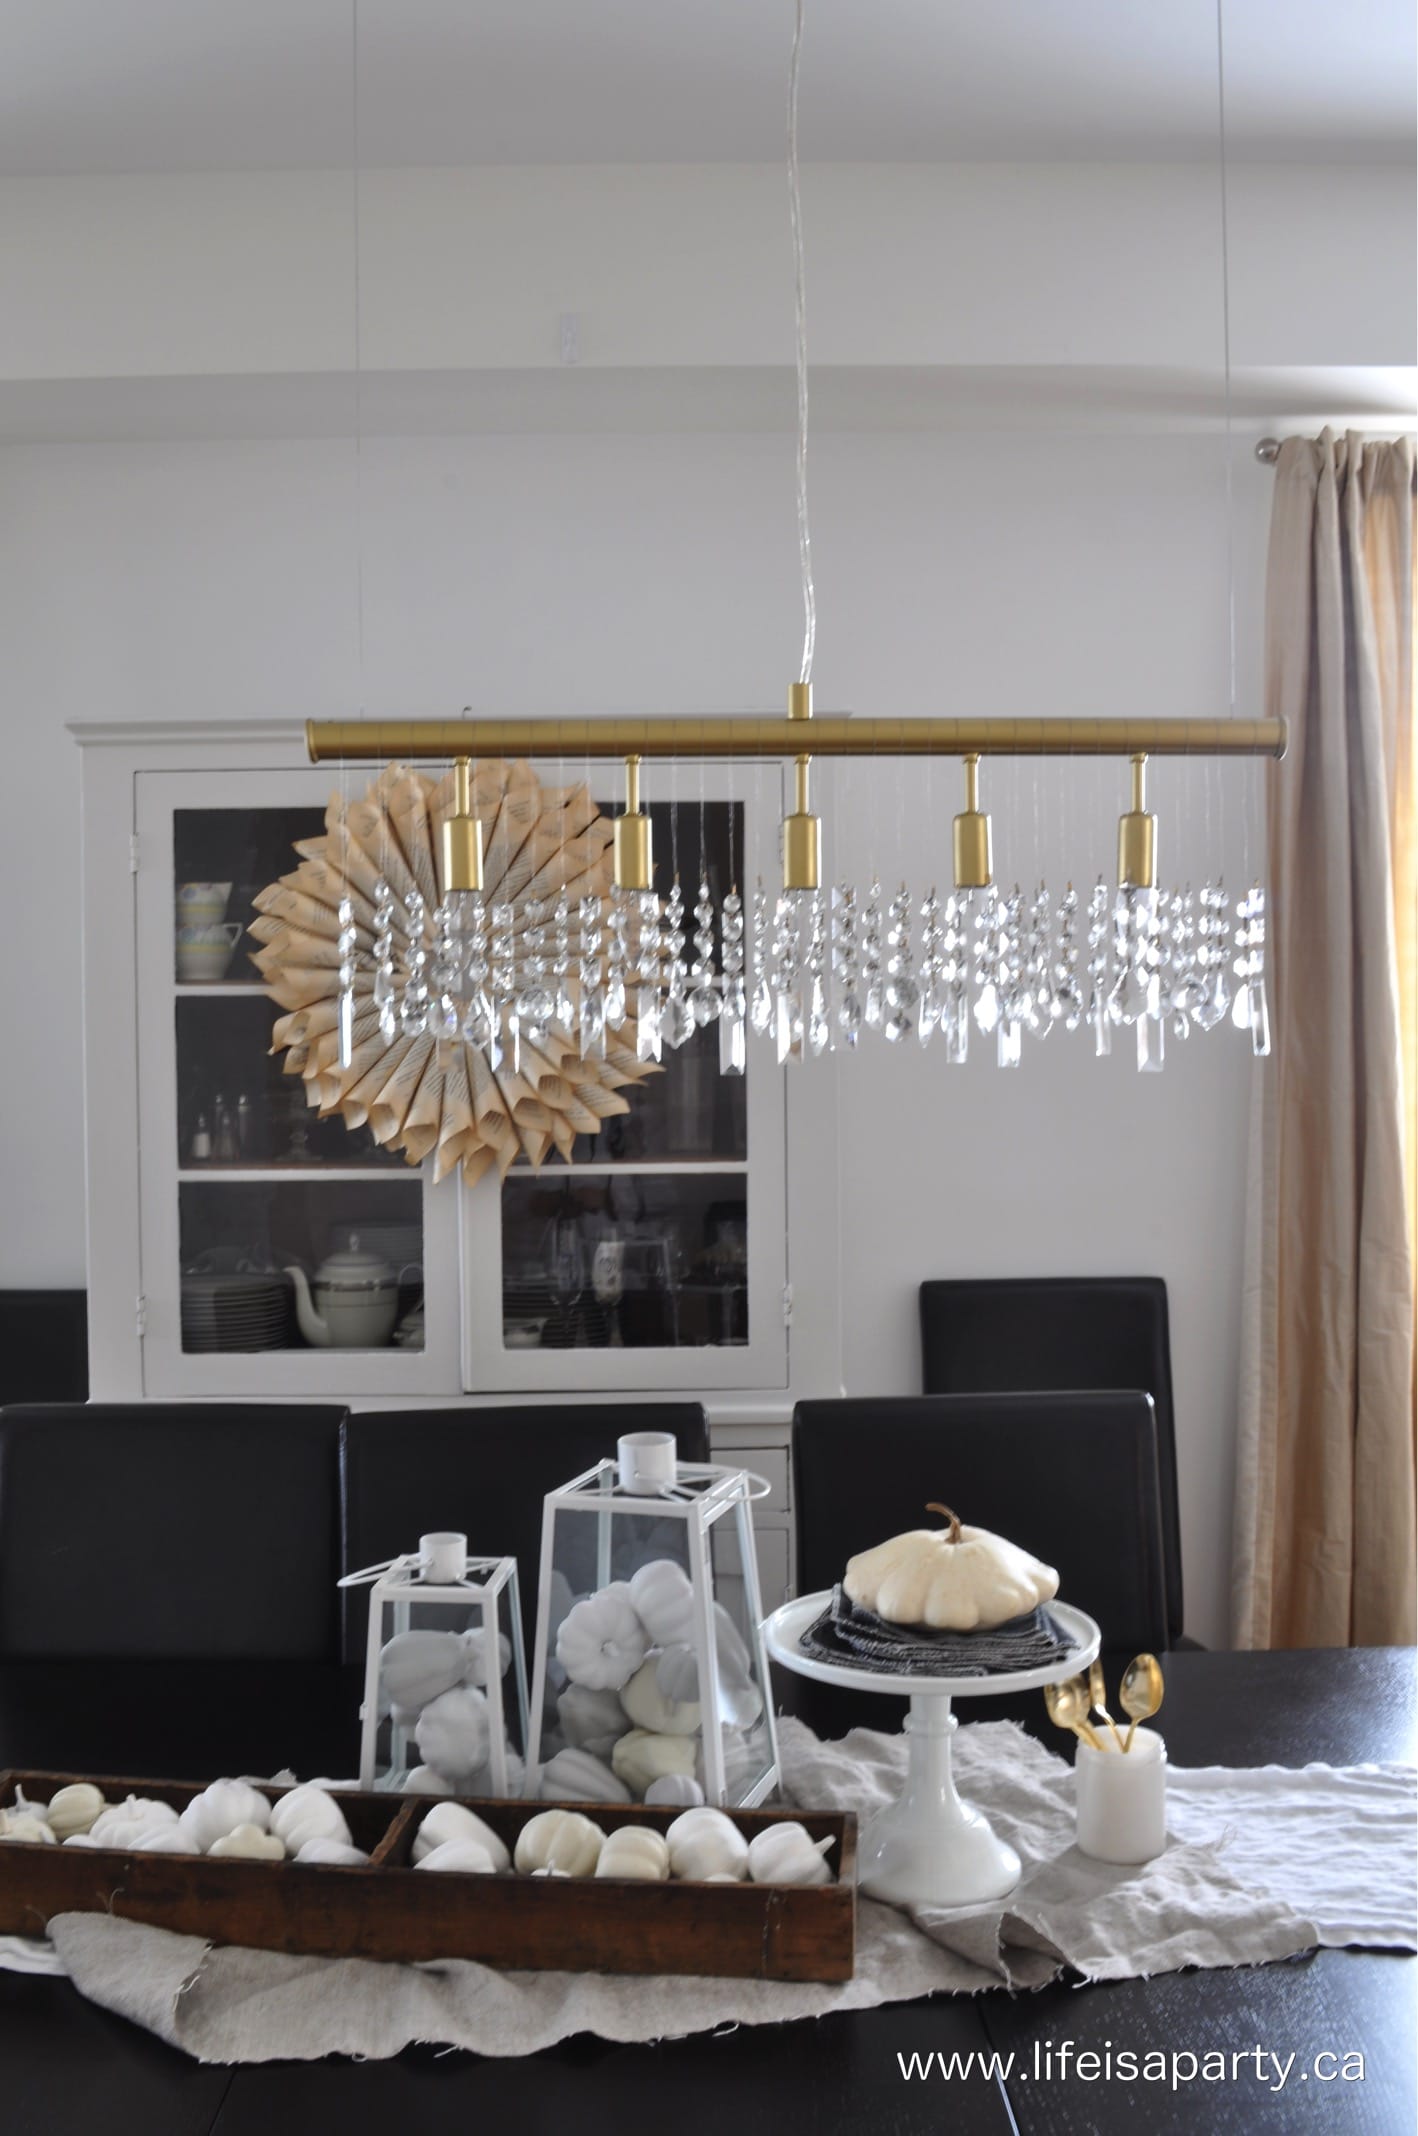 How To Spray Paint A Light Fixture: From boring silver to gold statement light with a little spray paint.